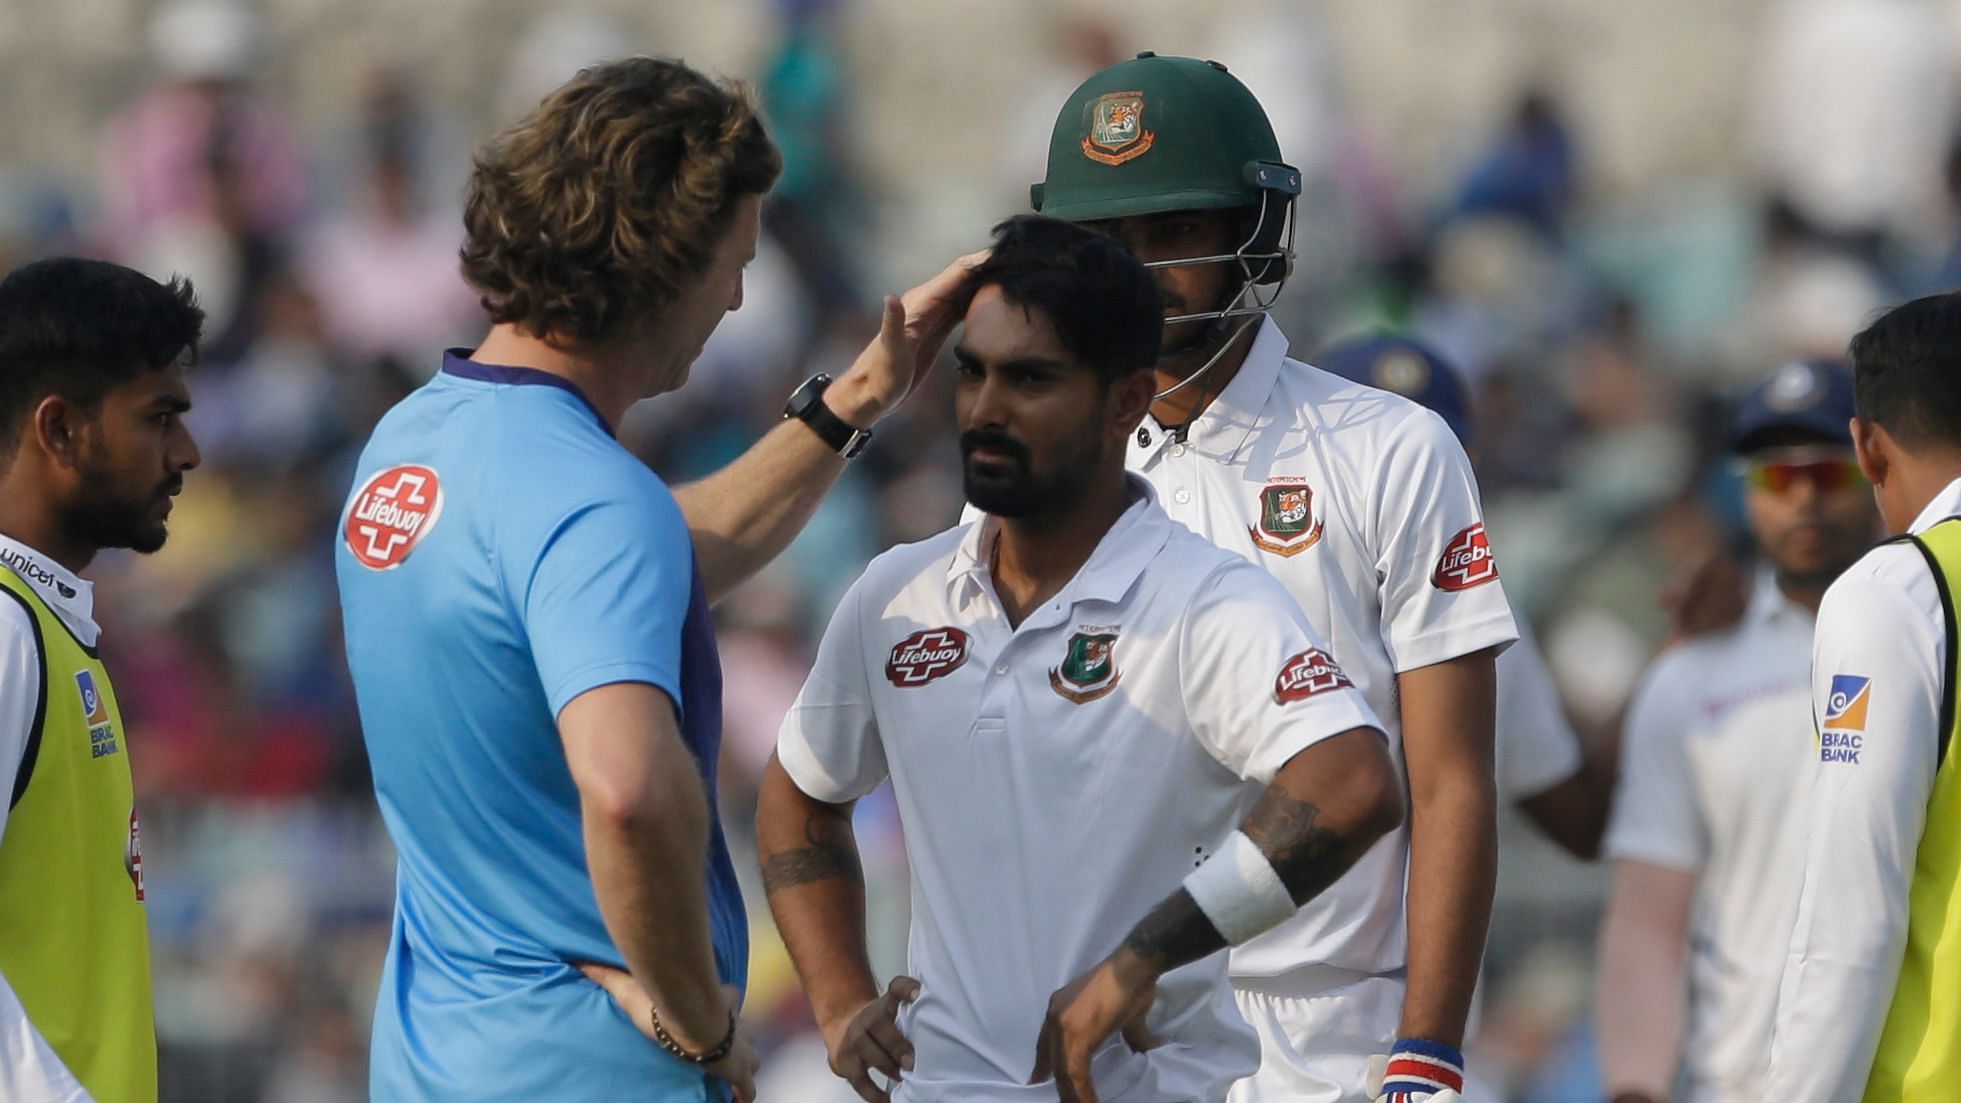 Bangladesh’s Mehidy Hasan and Taijul Islam were named concussion substitutes for Liton Das and Nayeem Hasan.